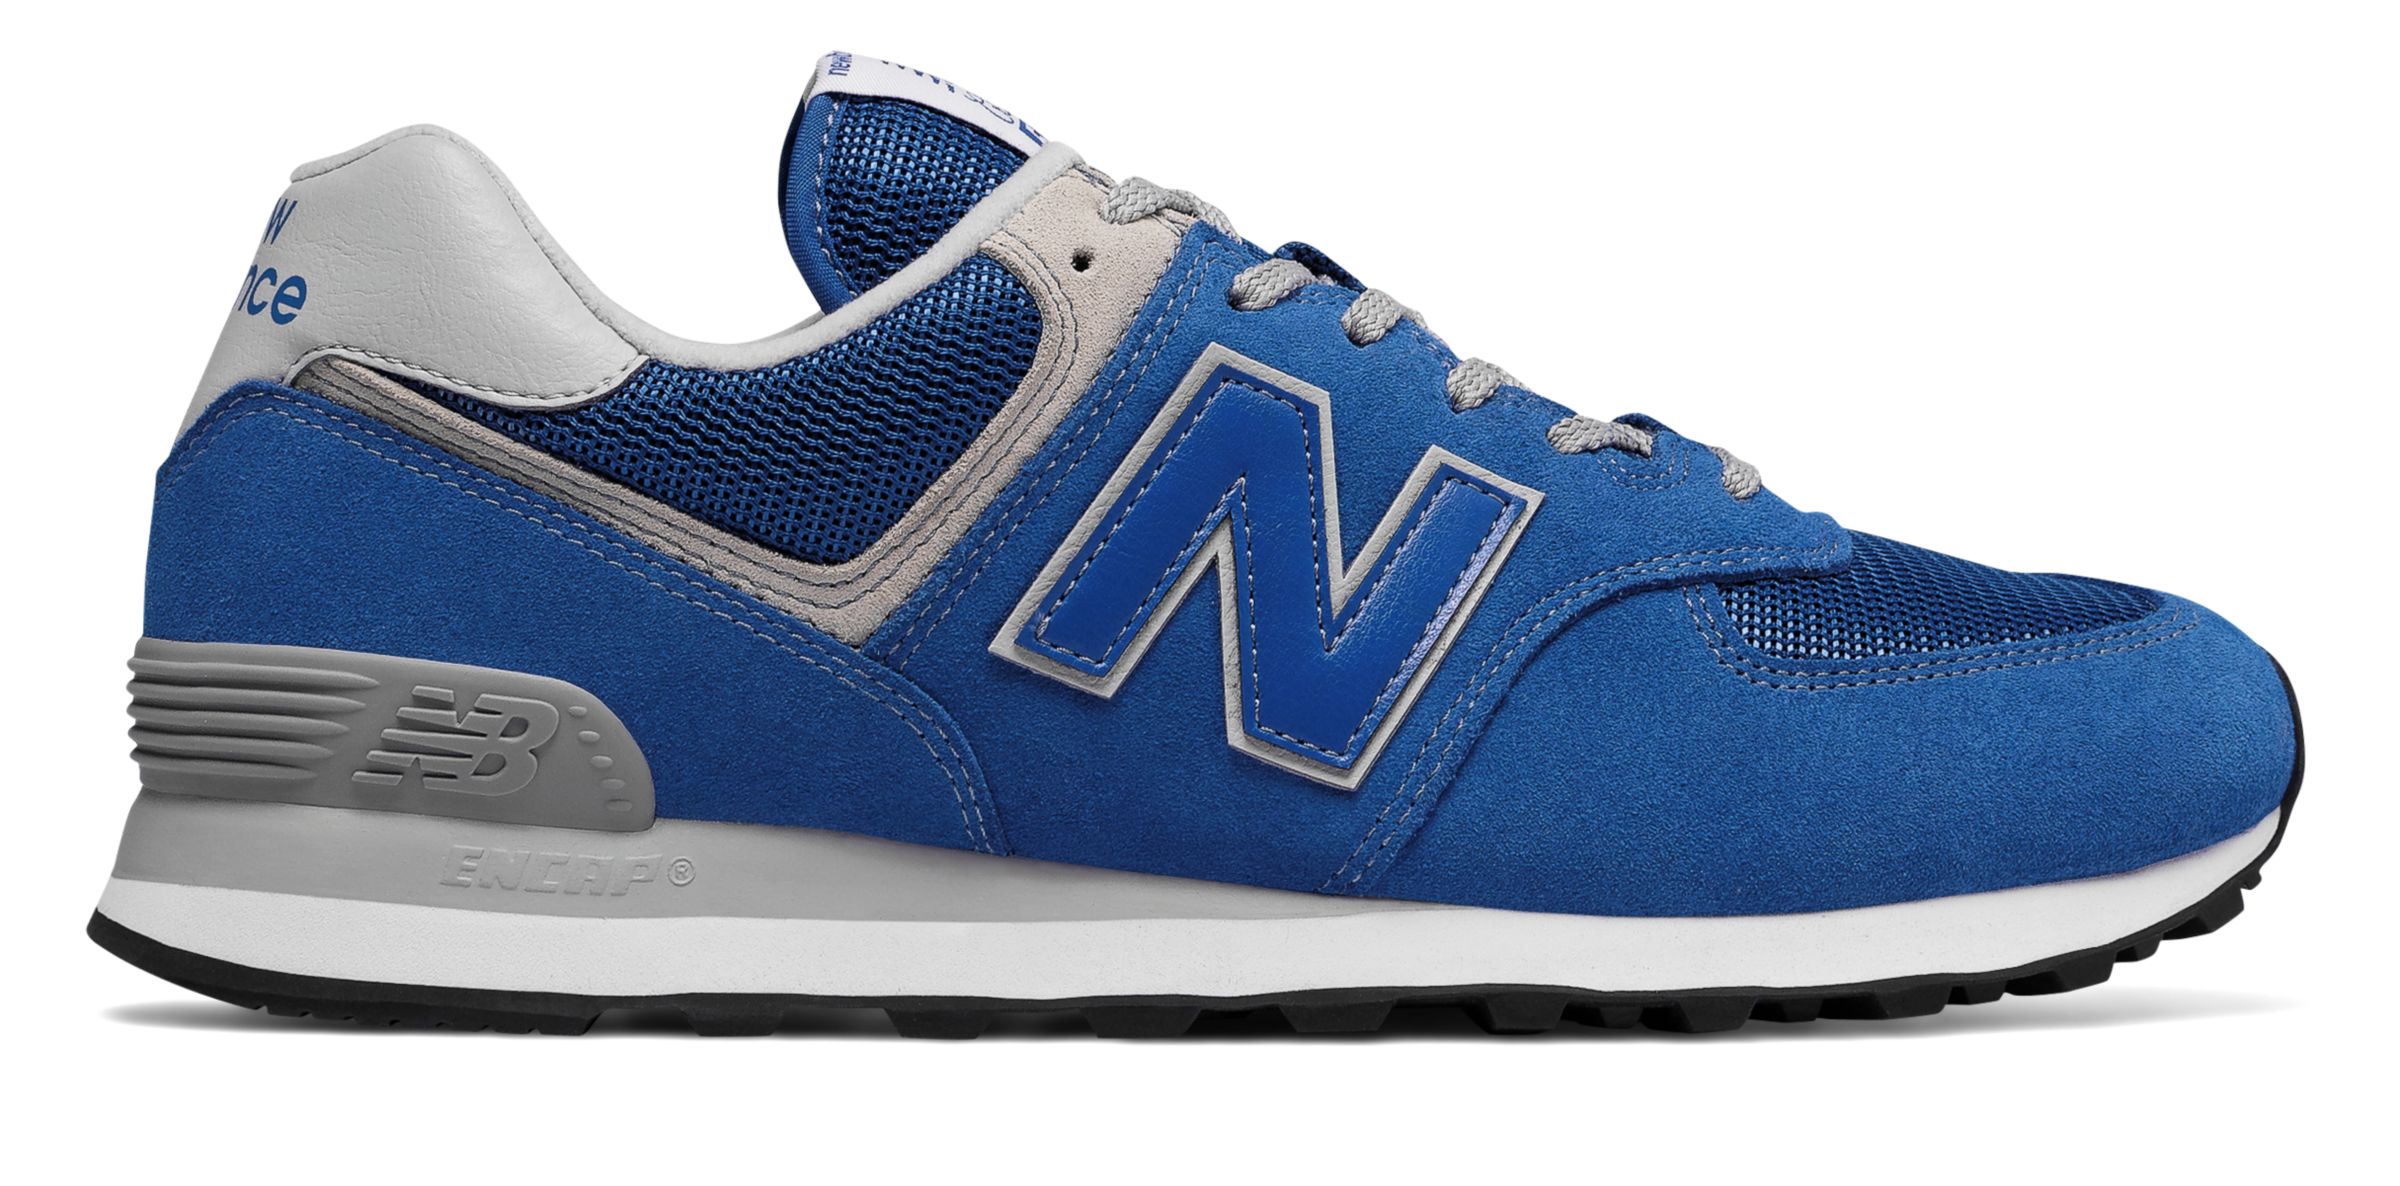 Lifestyle Shoes - Men's Sneakers Shoes | New Balance® Canada